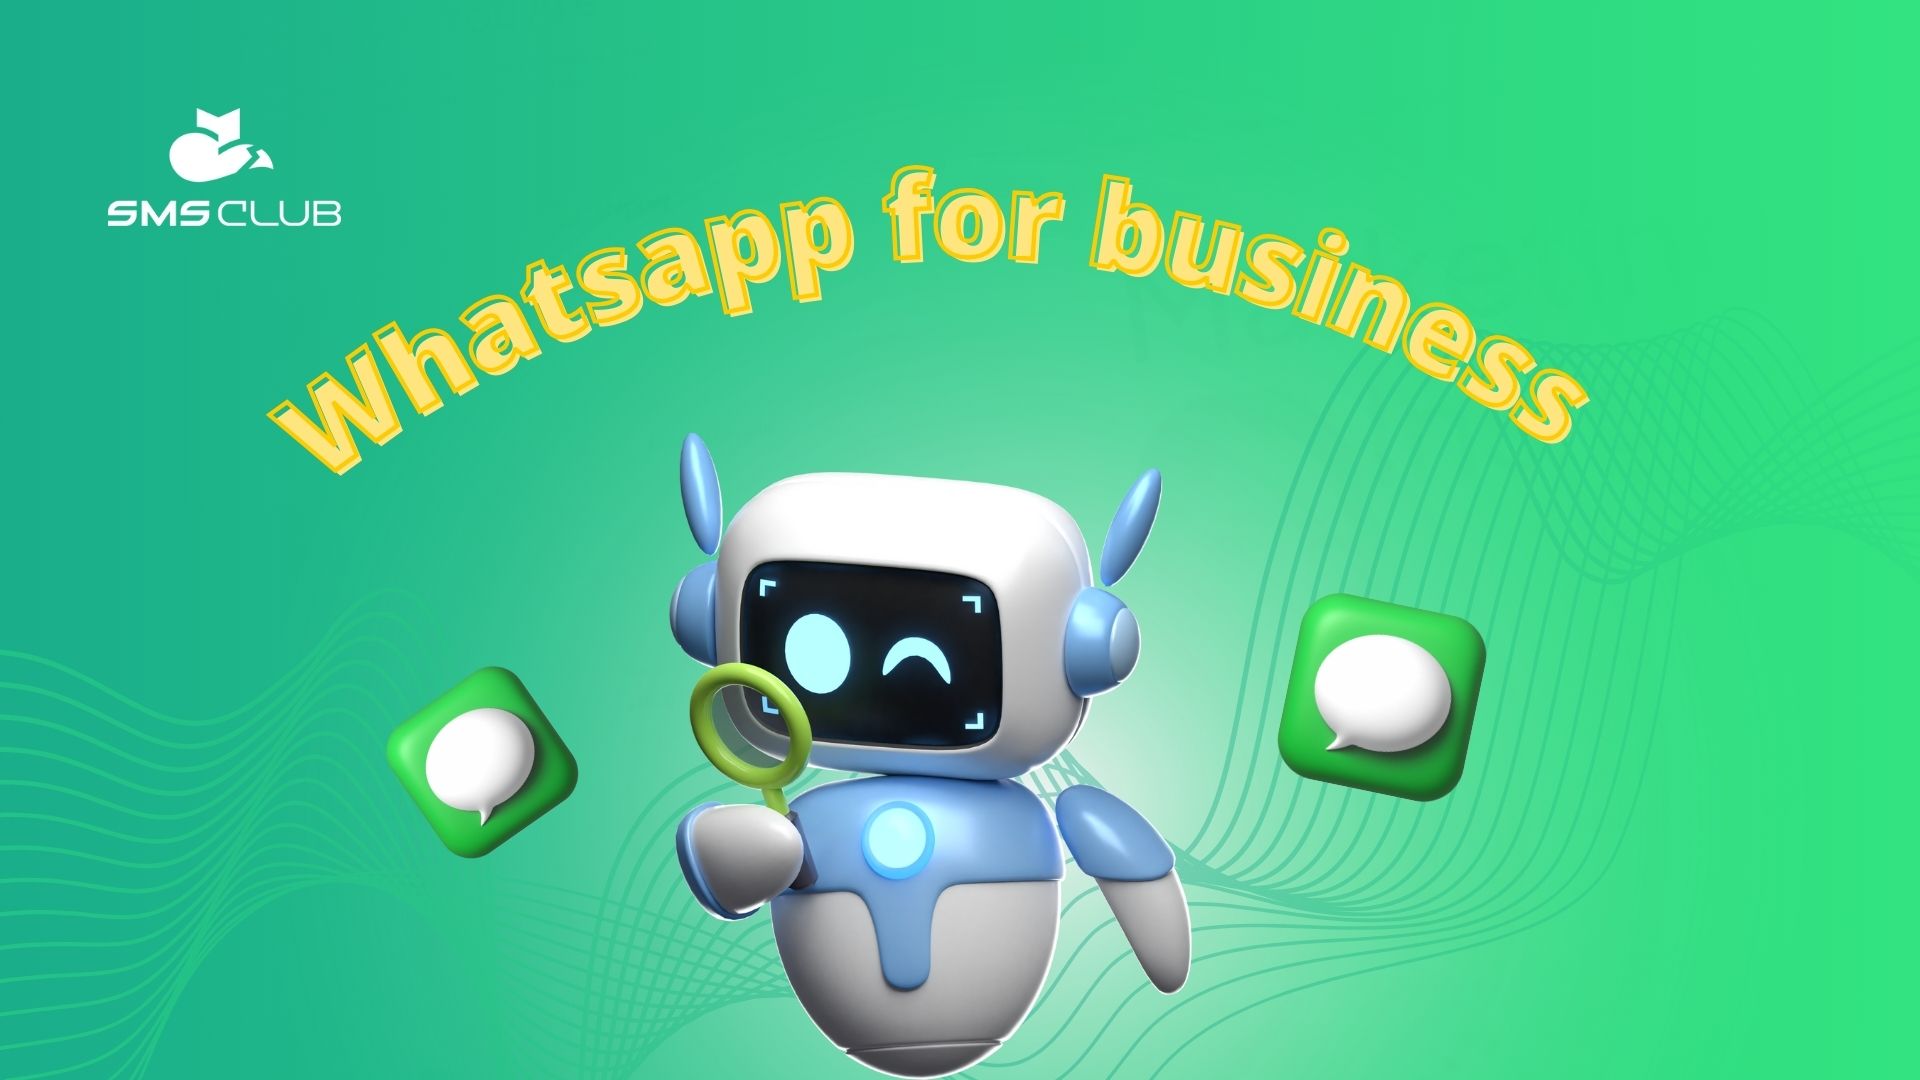 How to use Whatsapp for business